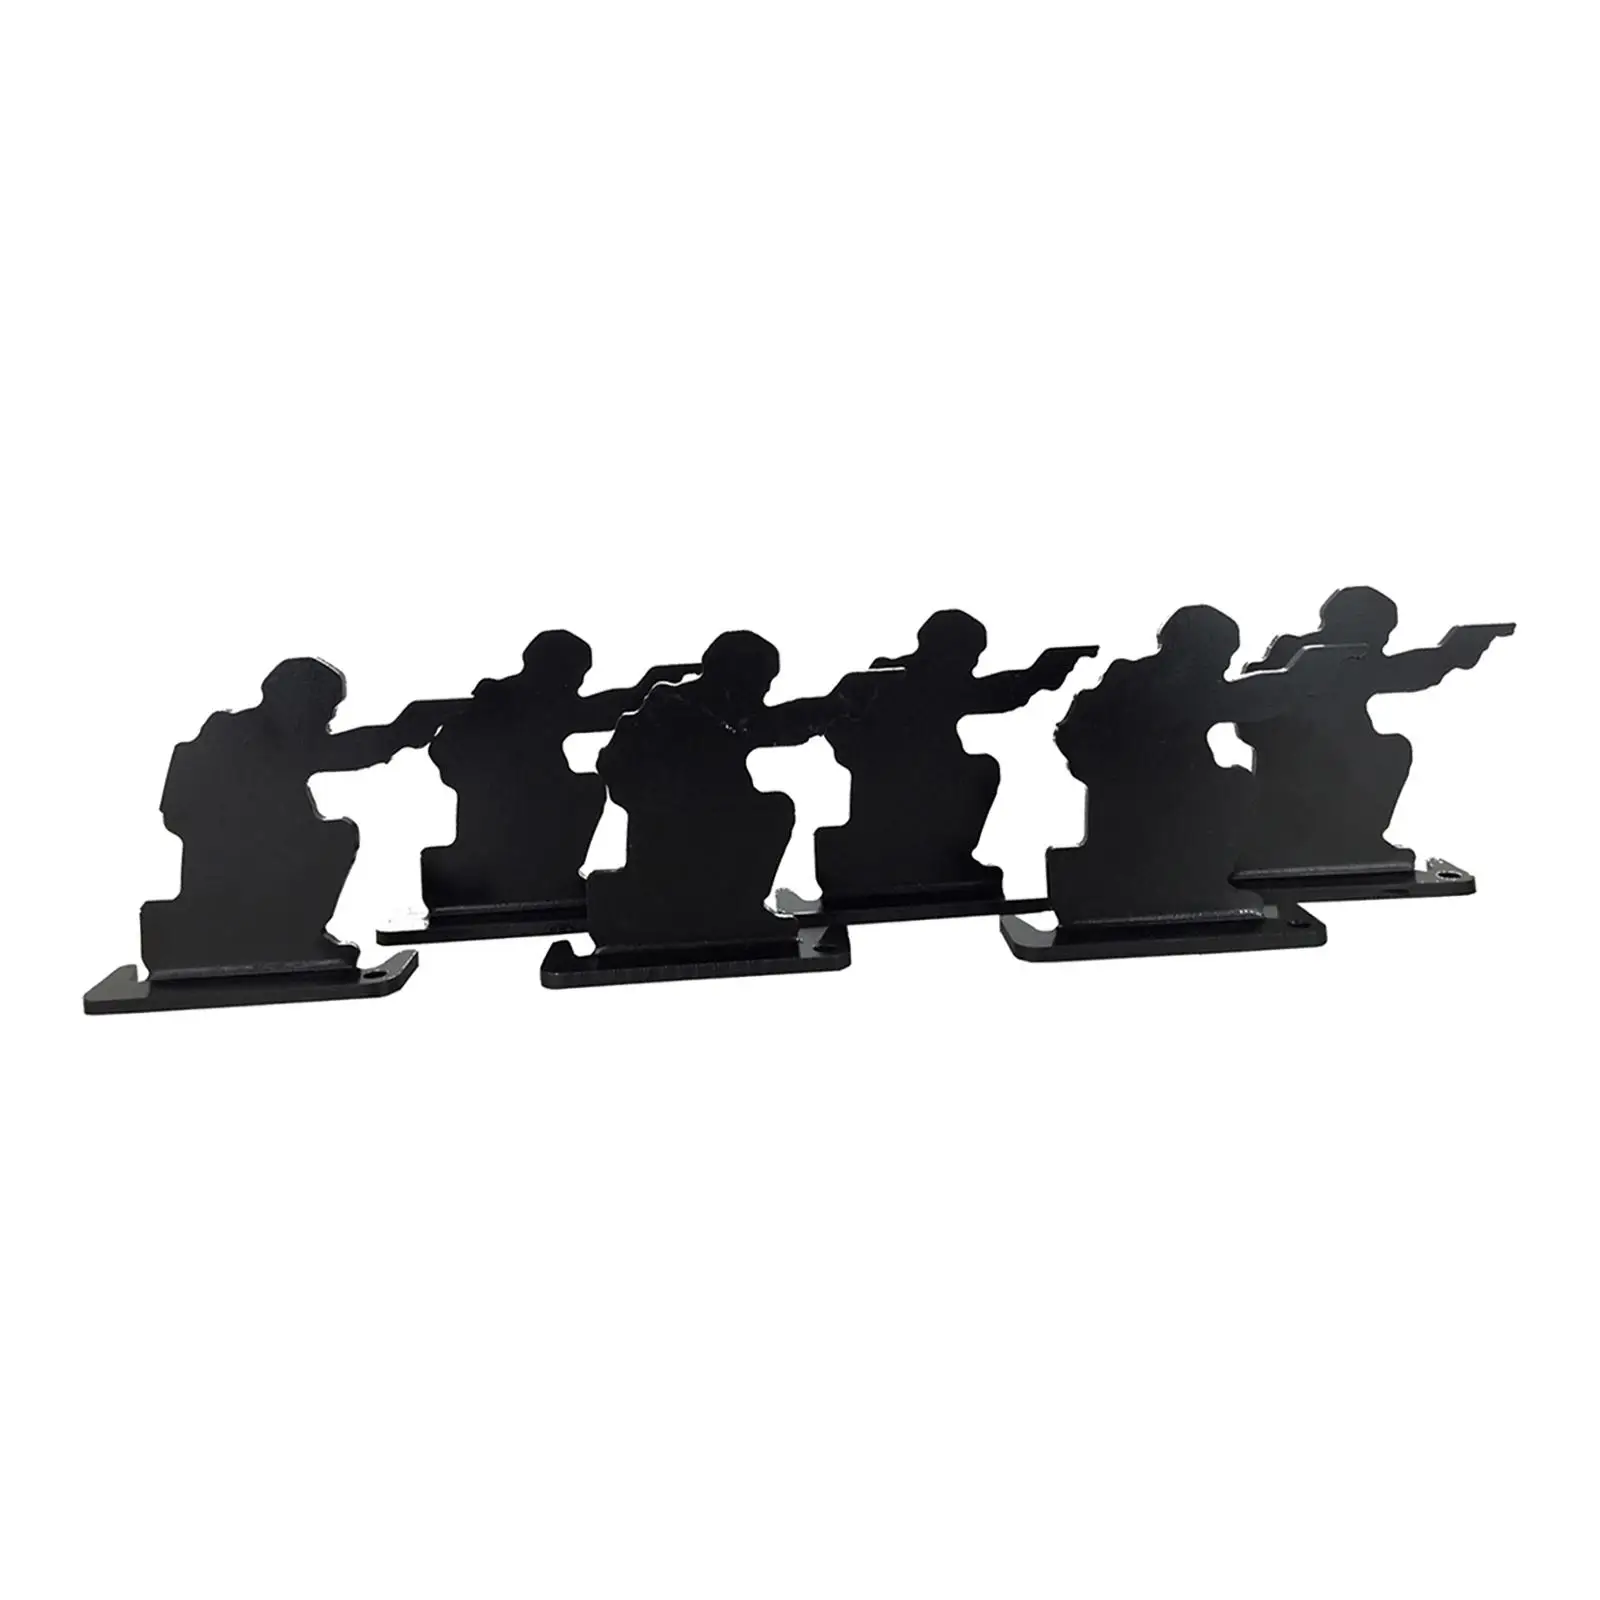 6 Pieces Small Human Silhouette Target Set Accessories Black Shooting Targets Tool for Practice Shooting Practice Training Range